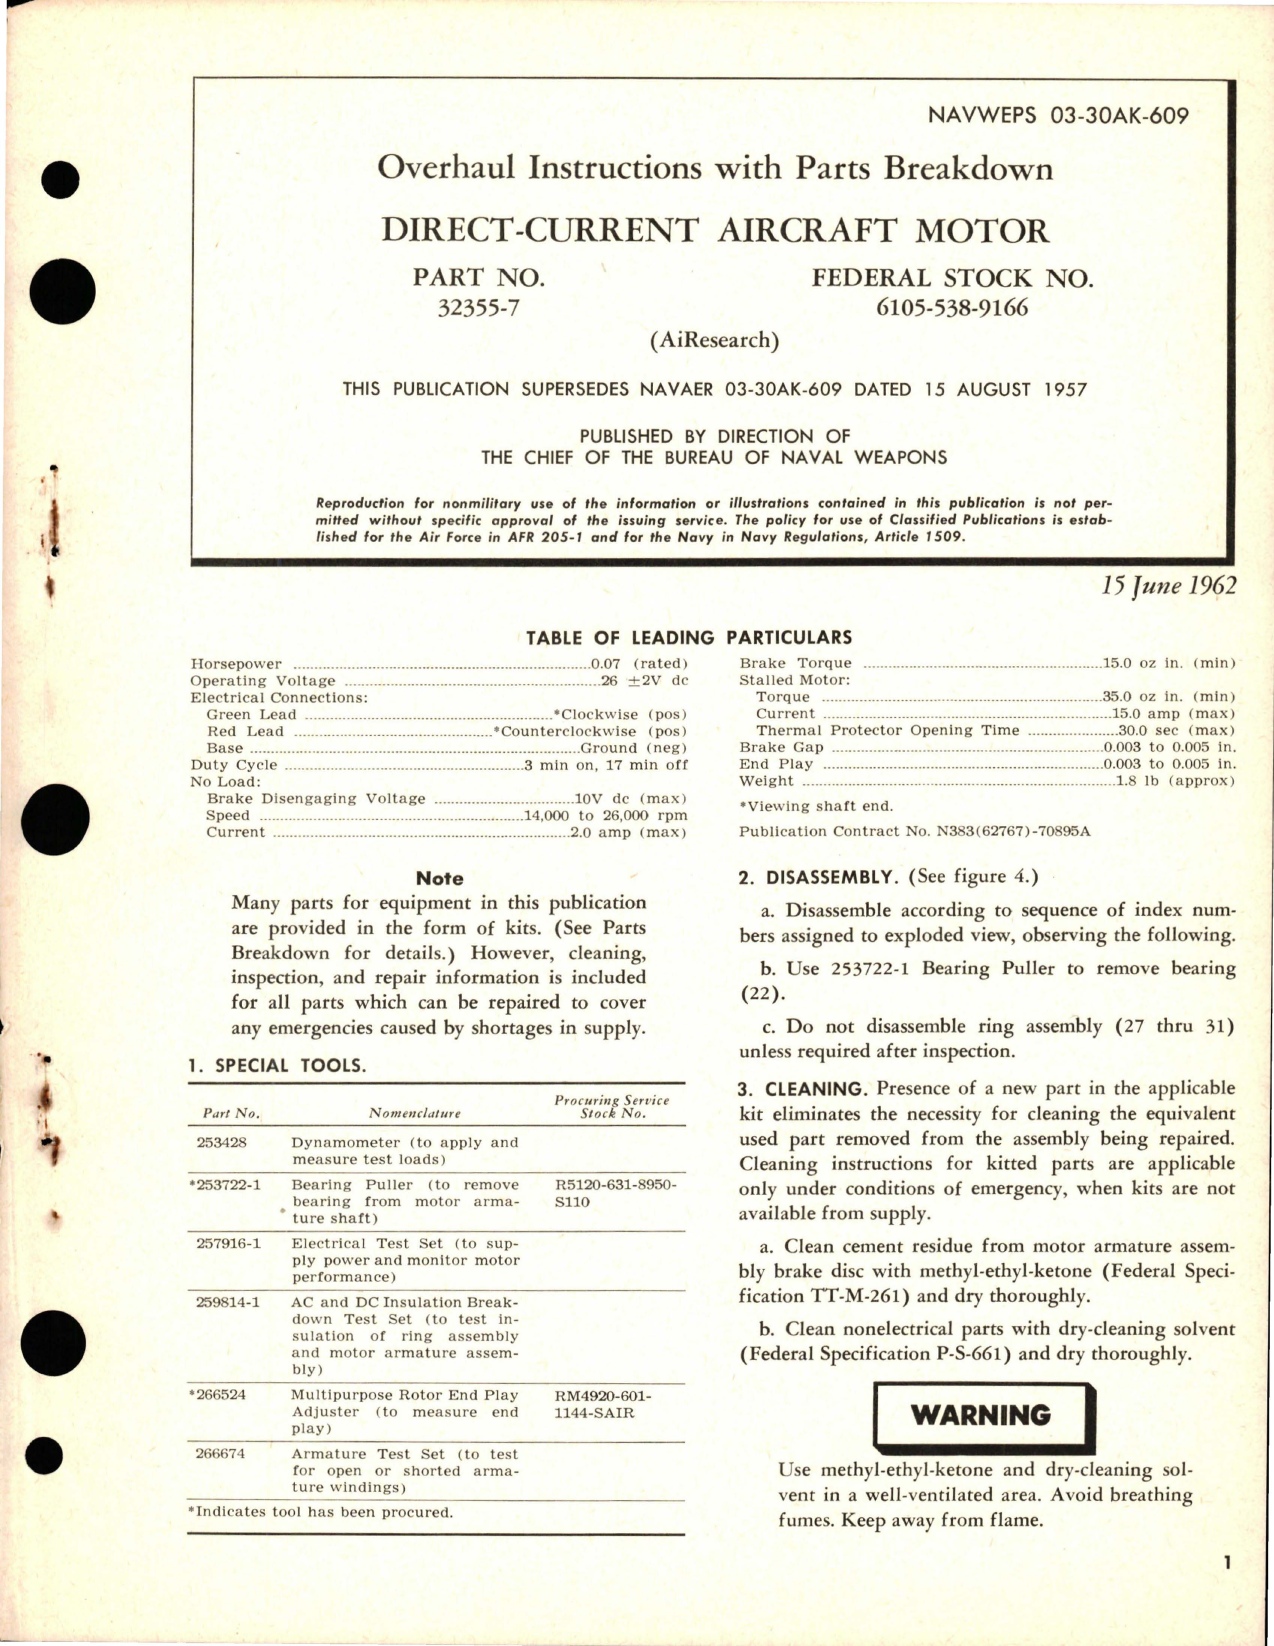 Sample page 1 from AirCorps Library document: Overhaul Instructions with Parts Breakdown for Direct-Current Aircraft Motor - Part 32355-7 